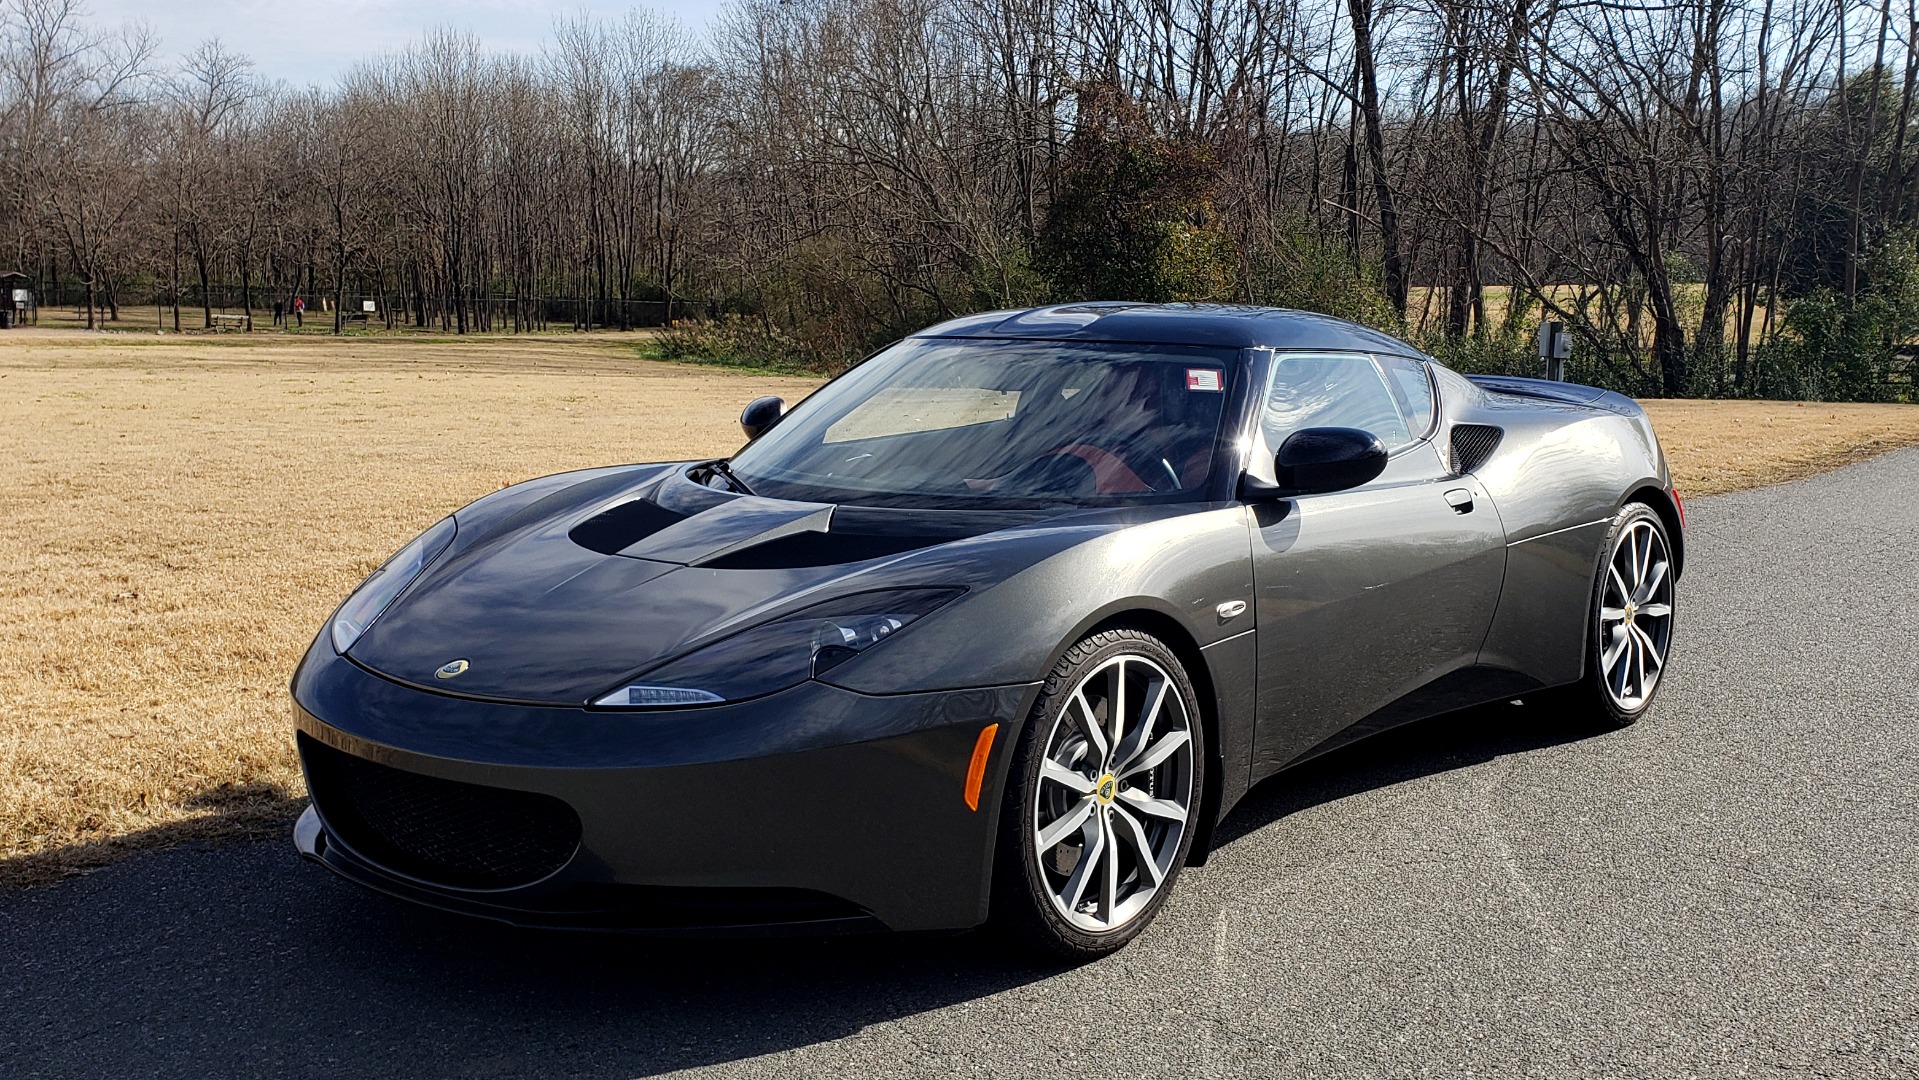 Used 2011 Lotus EVORA S 2+2 / 3.5L V6 / 6-SPD MANUAL / PIONEER / REARVIEW / LOW MILES for sale Sold at Formula Imports in Charlotte NC 28227 1